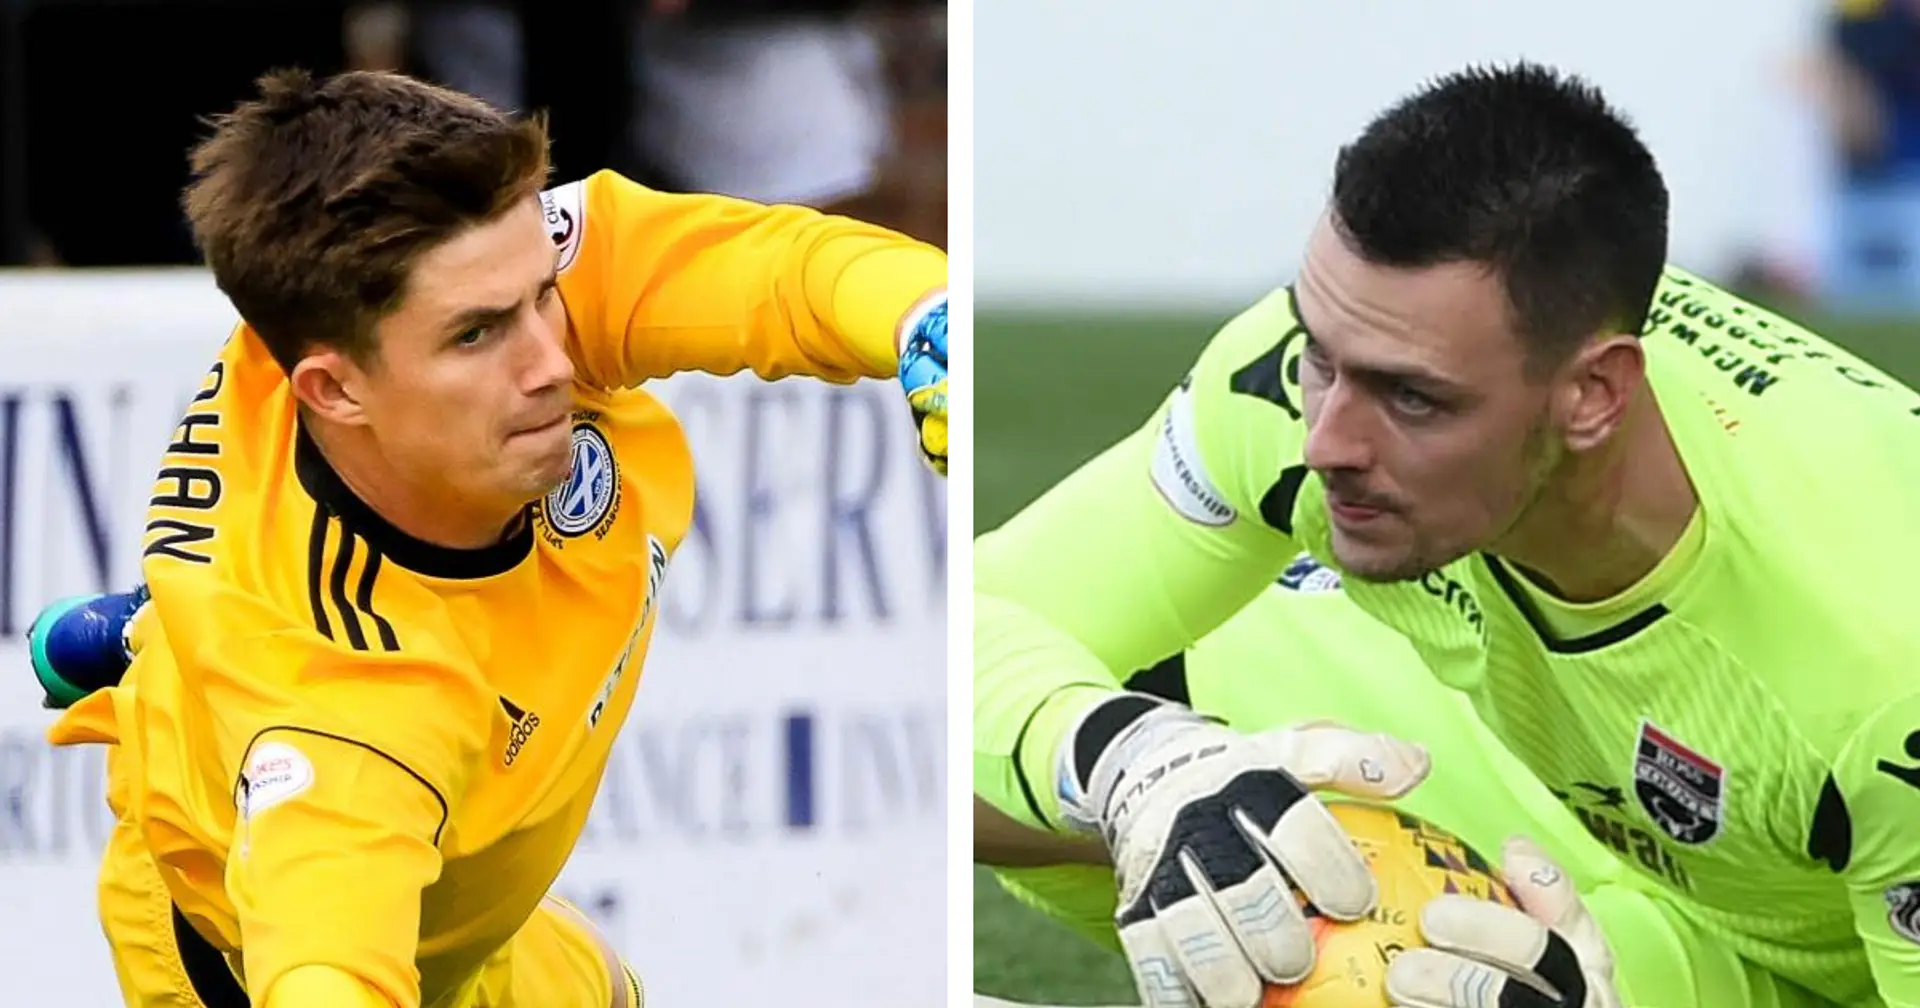 Coincidence or best scouting game in the world? All Ross County goalkeepers are named 'Ross'